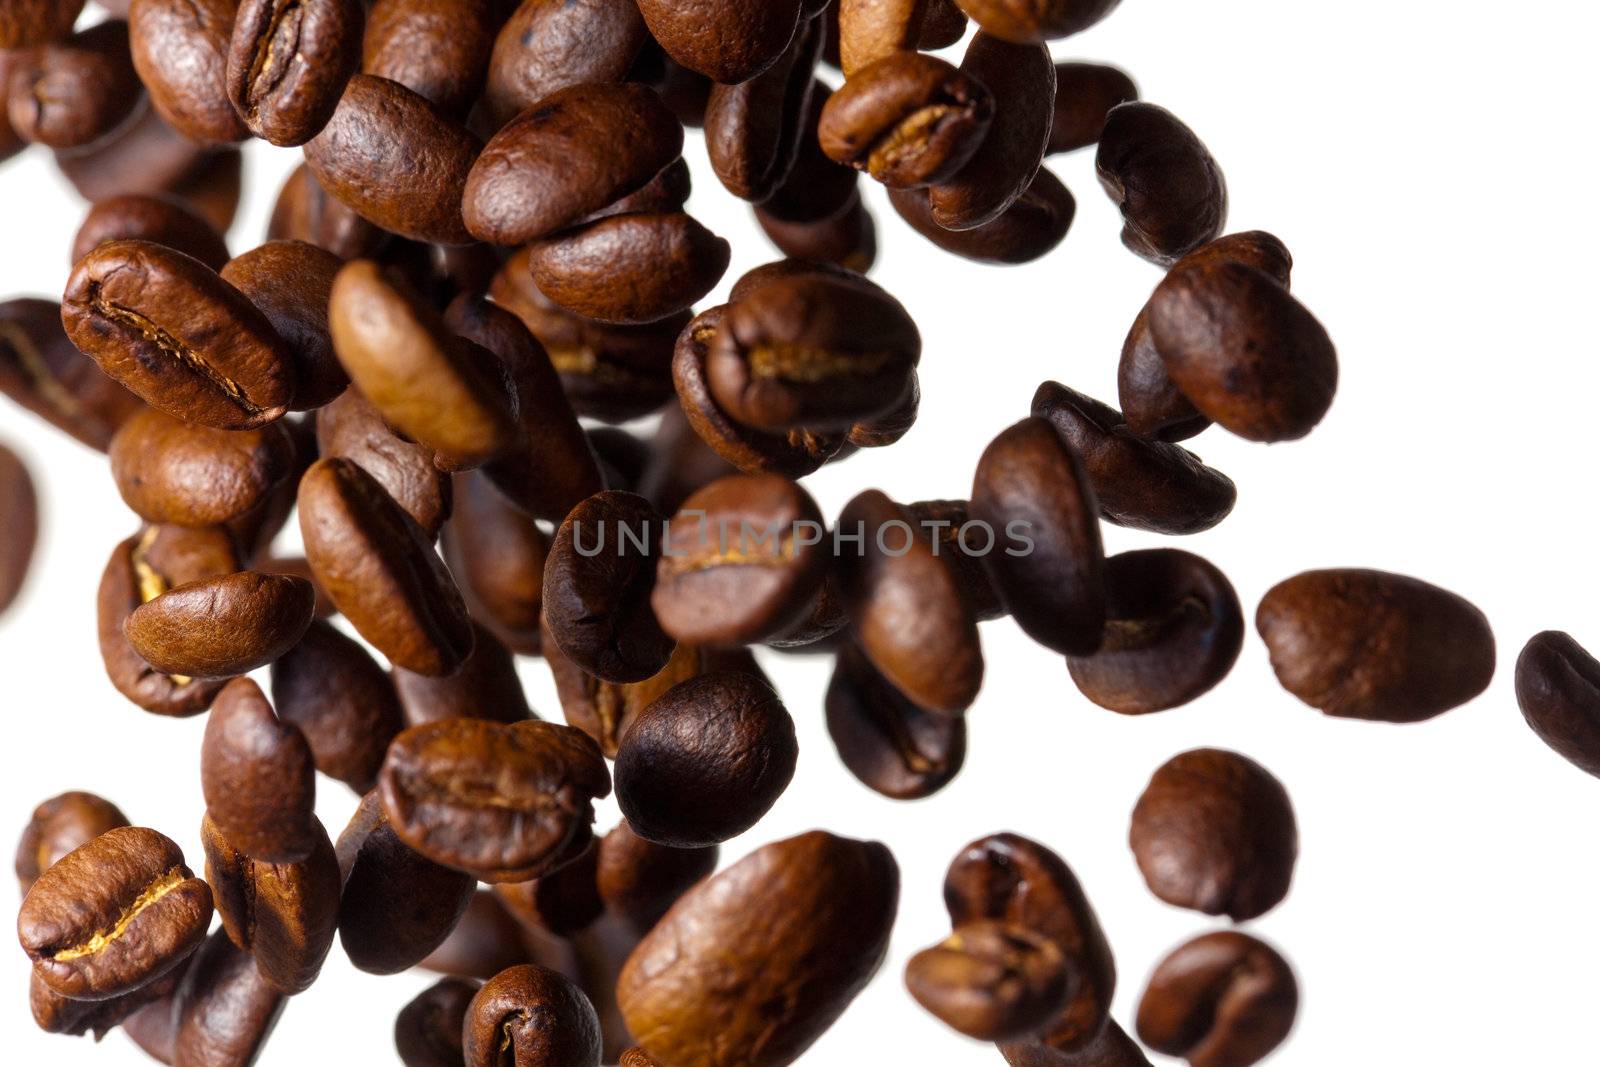 Falling coffee beans on white background by Antartis